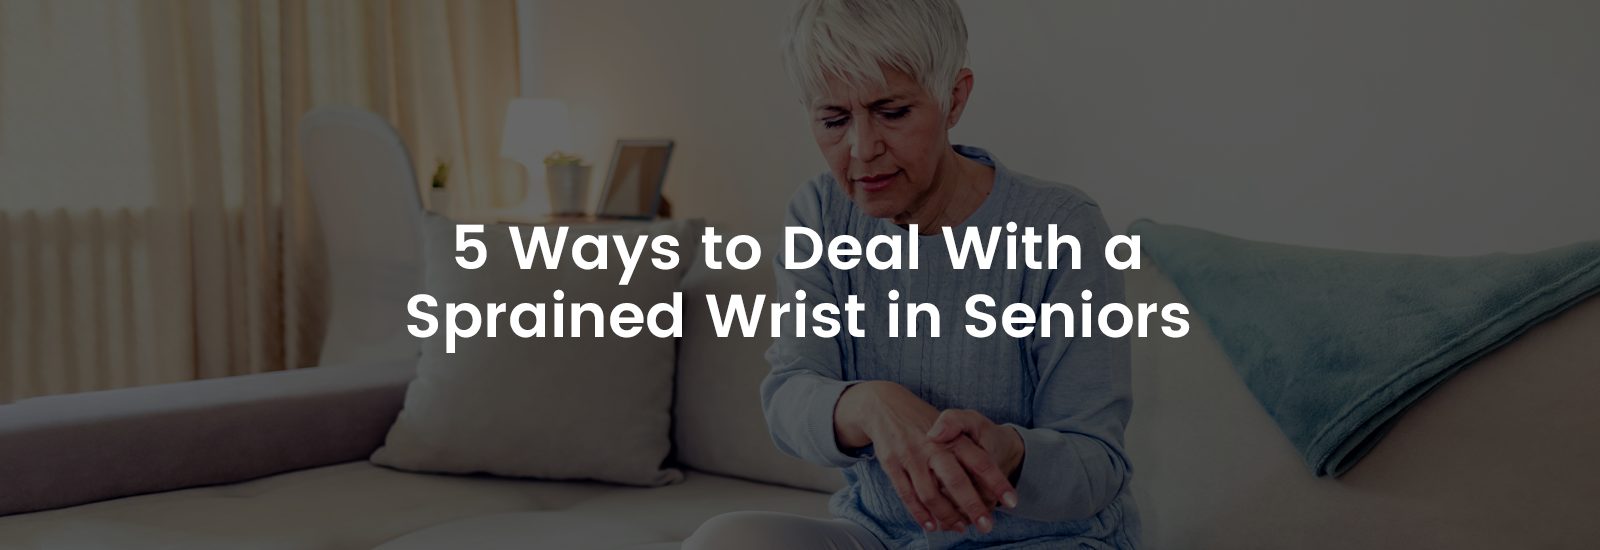 5 Ways to Deal with a Sprained Wrist in Seniors | Banner Image